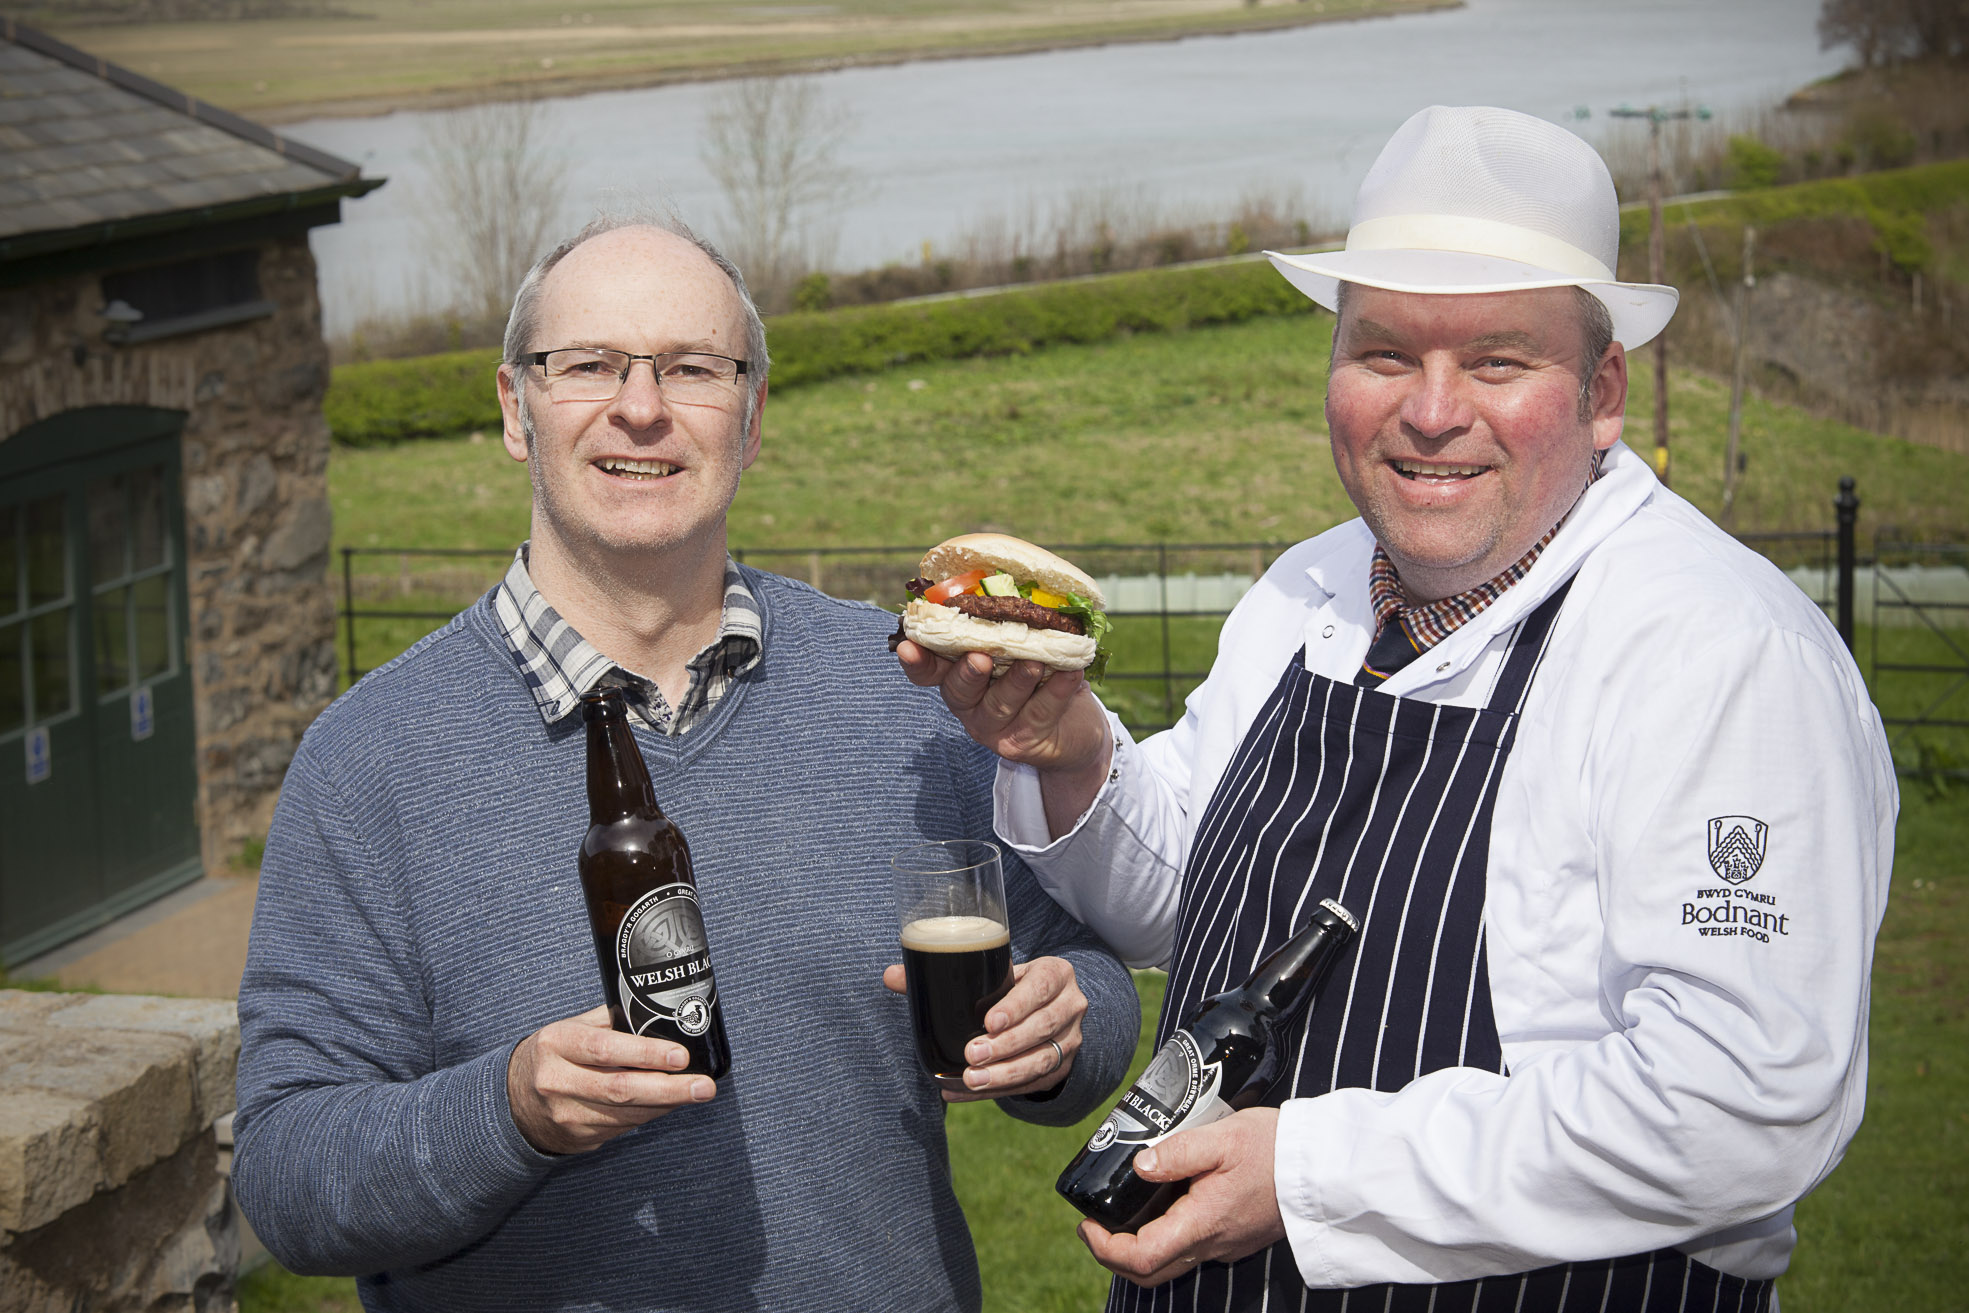 Bodnant Welsh Food Centre teams up with brewery to create burger with a real kick